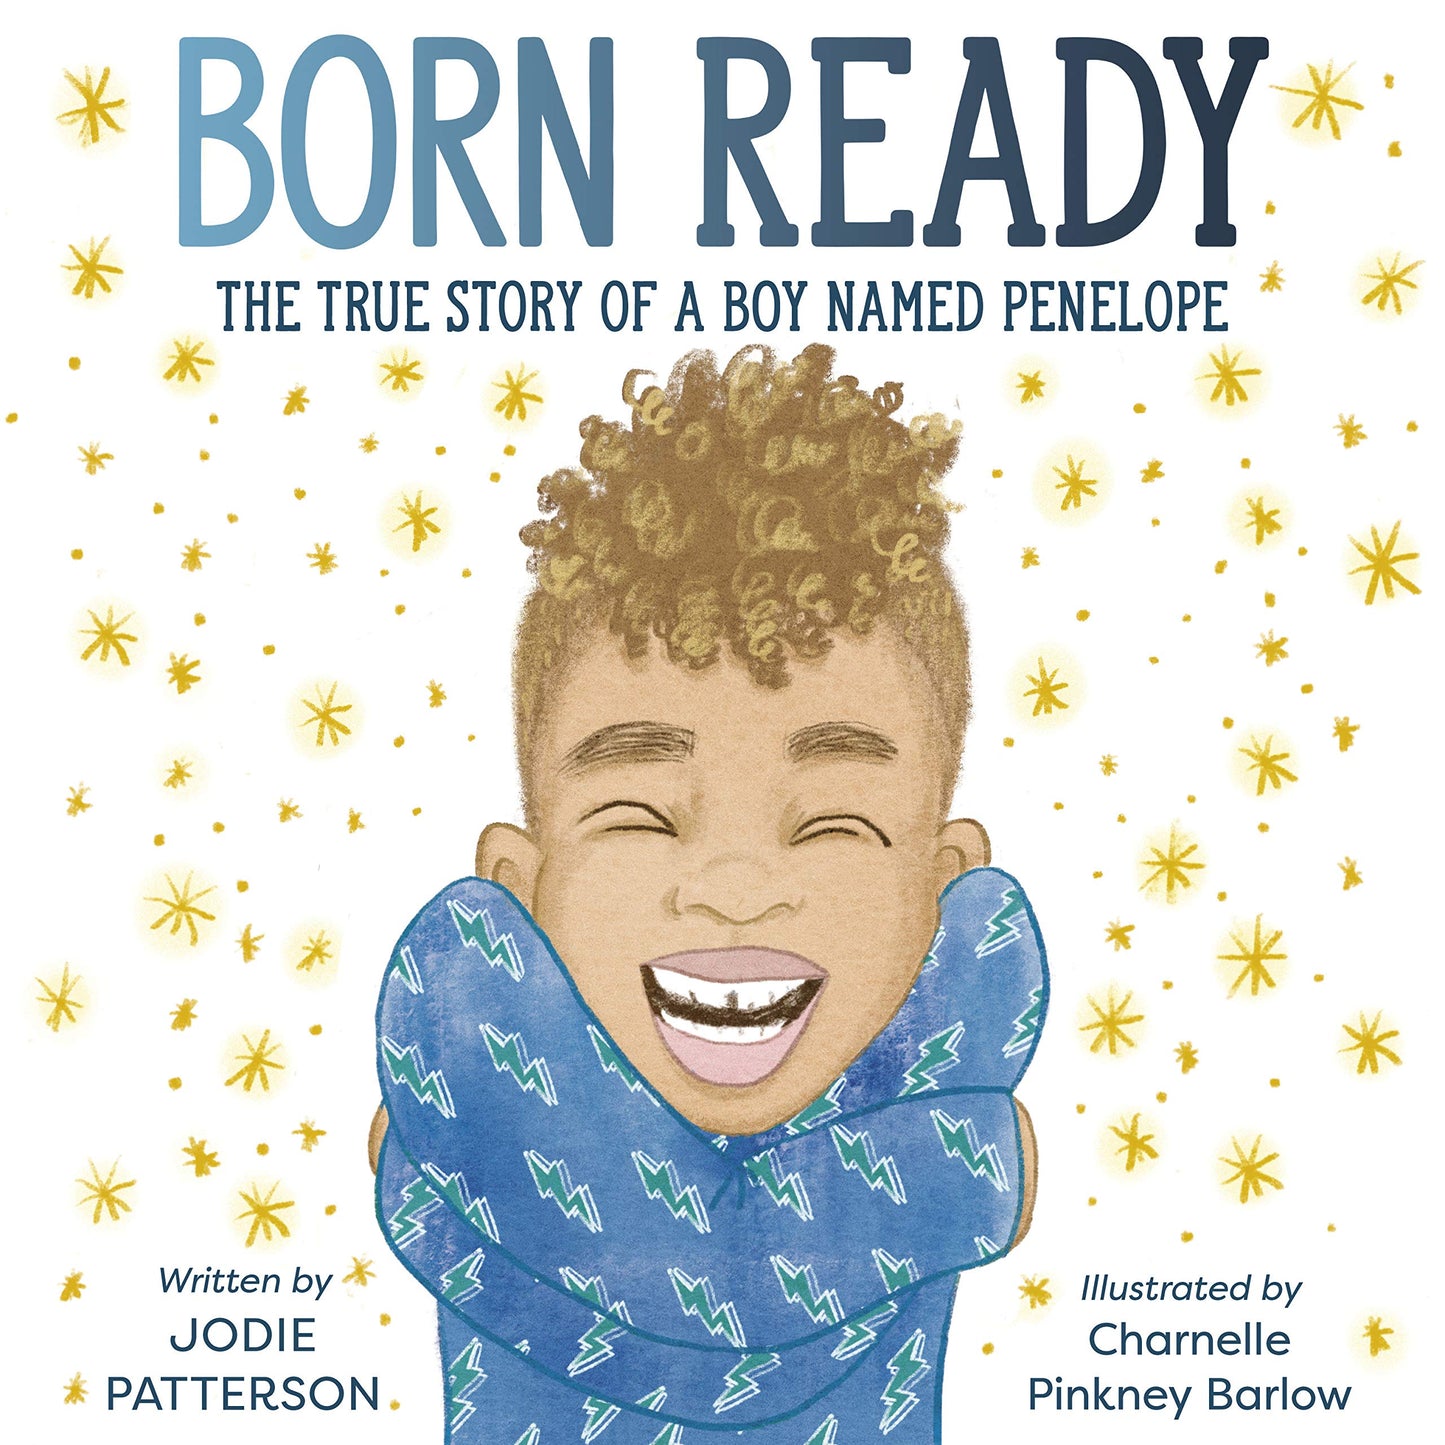 Born Ready: The True Story of a Boy Named Penelope (Hardcover)